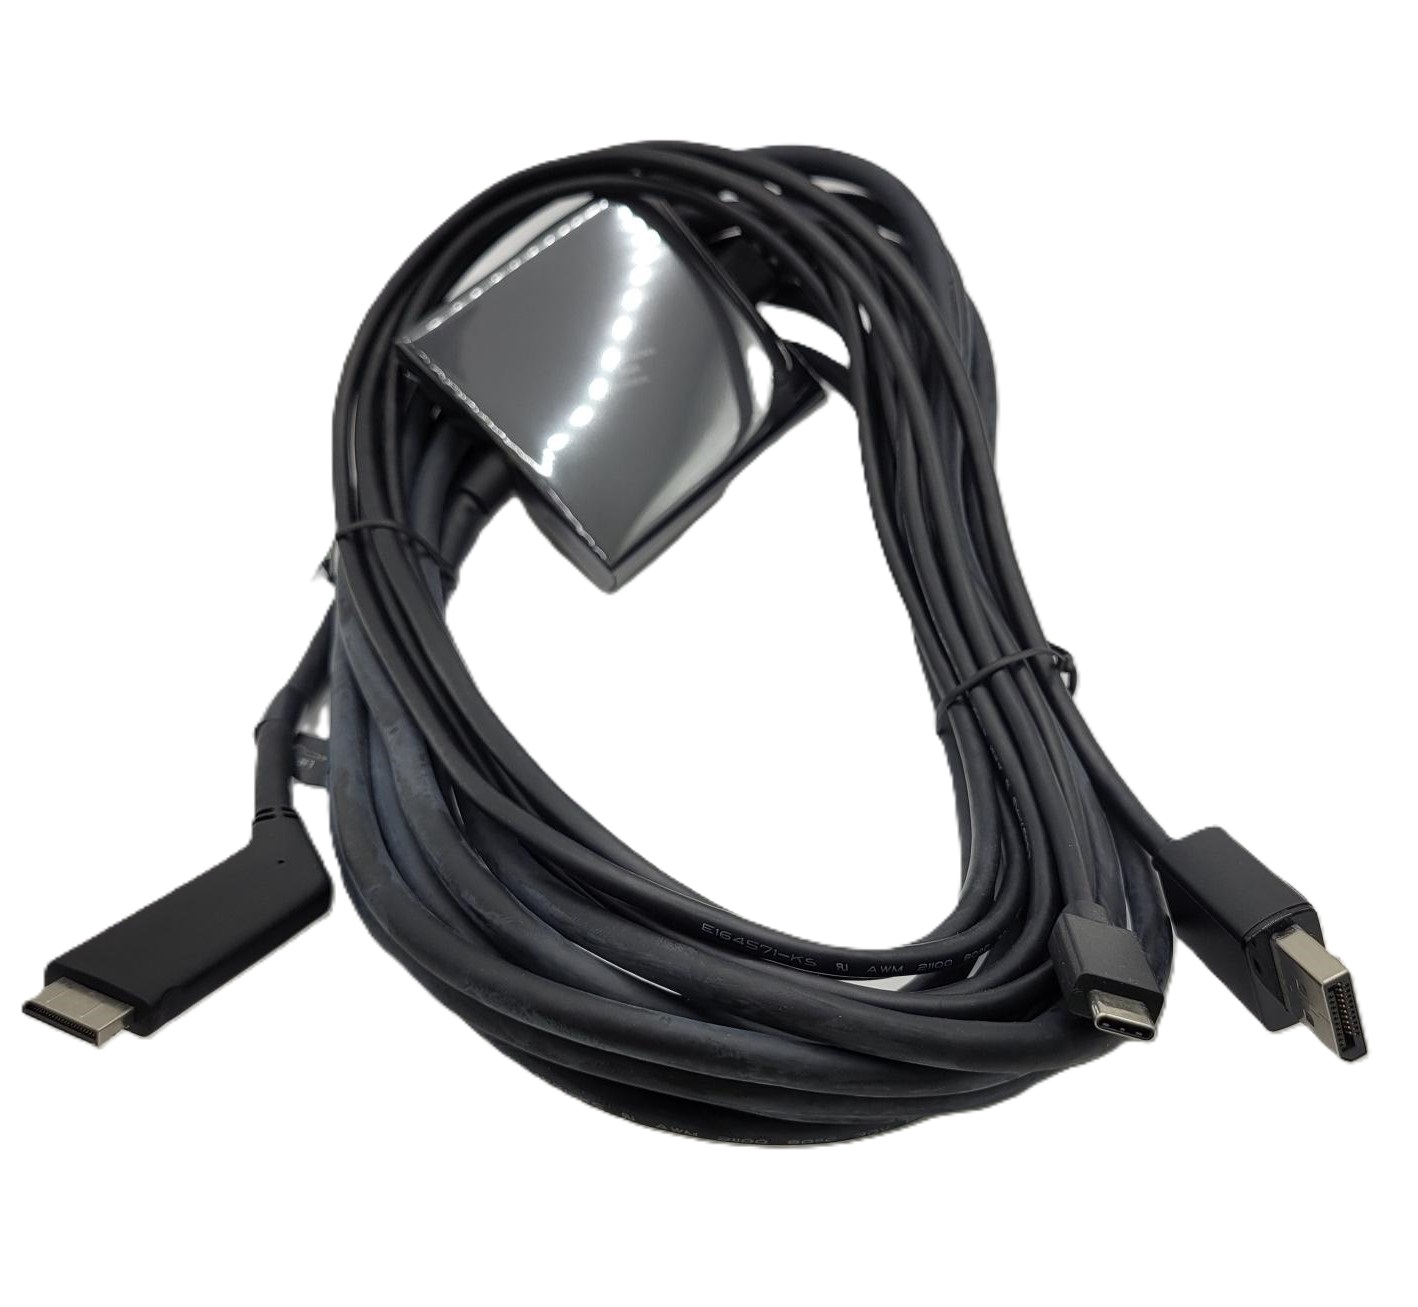 HP Part  Original HP Reverb Virtual Reality (VR) Headset G2 6M Cable with Switch, 22J68AA, L72080-002 (Version 2 Cable)